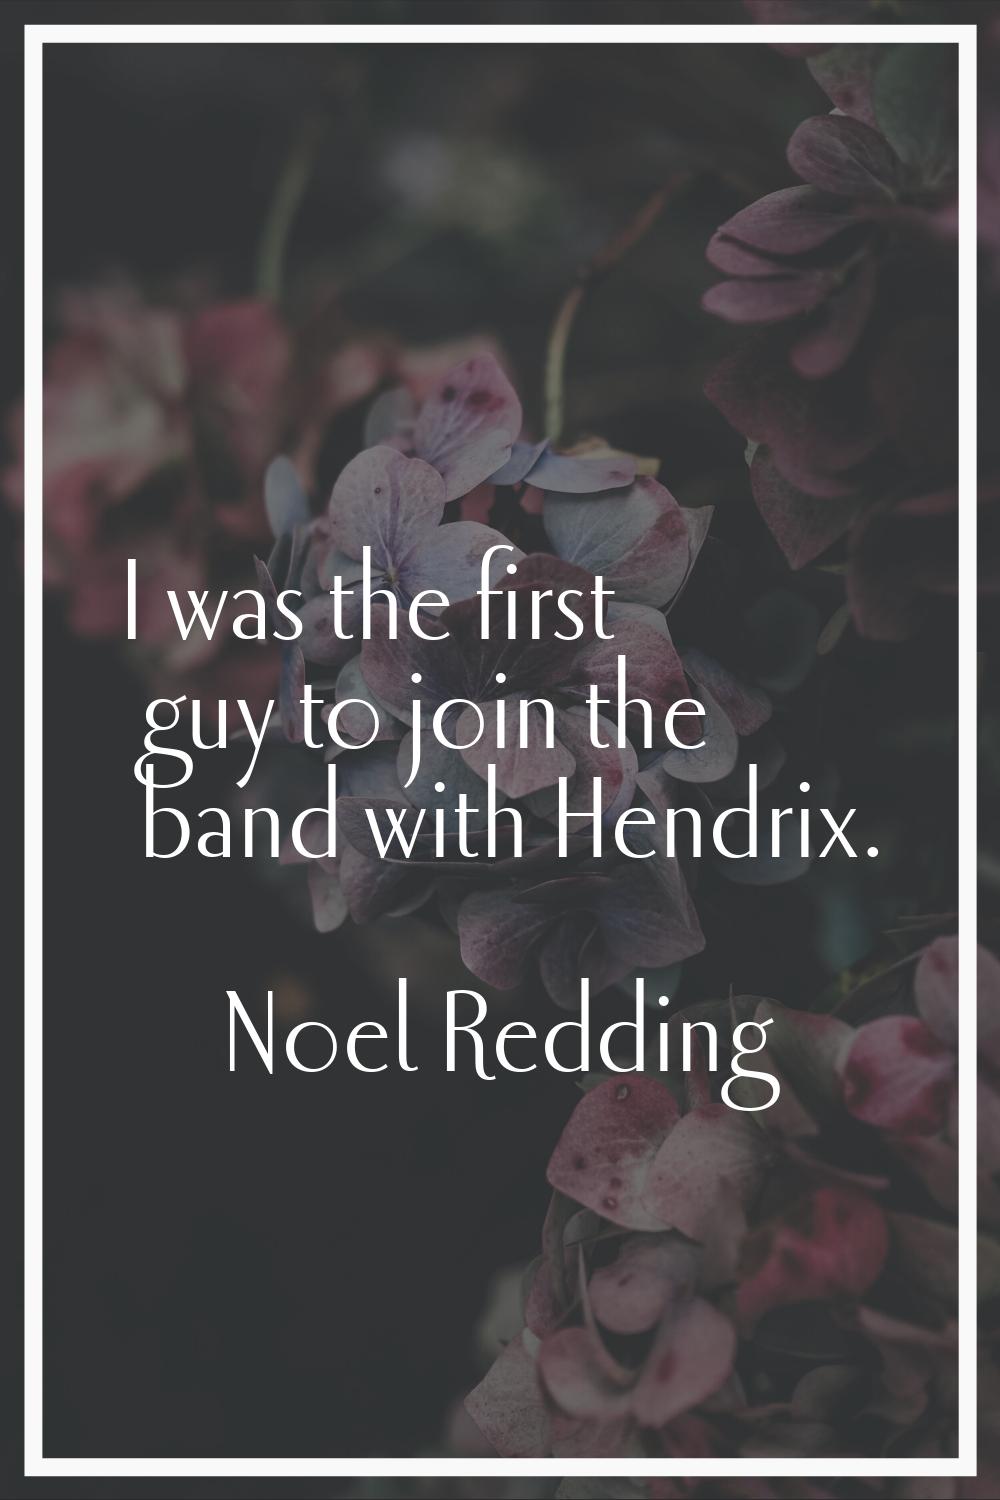 I was the first guy to join the band with Hendrix.